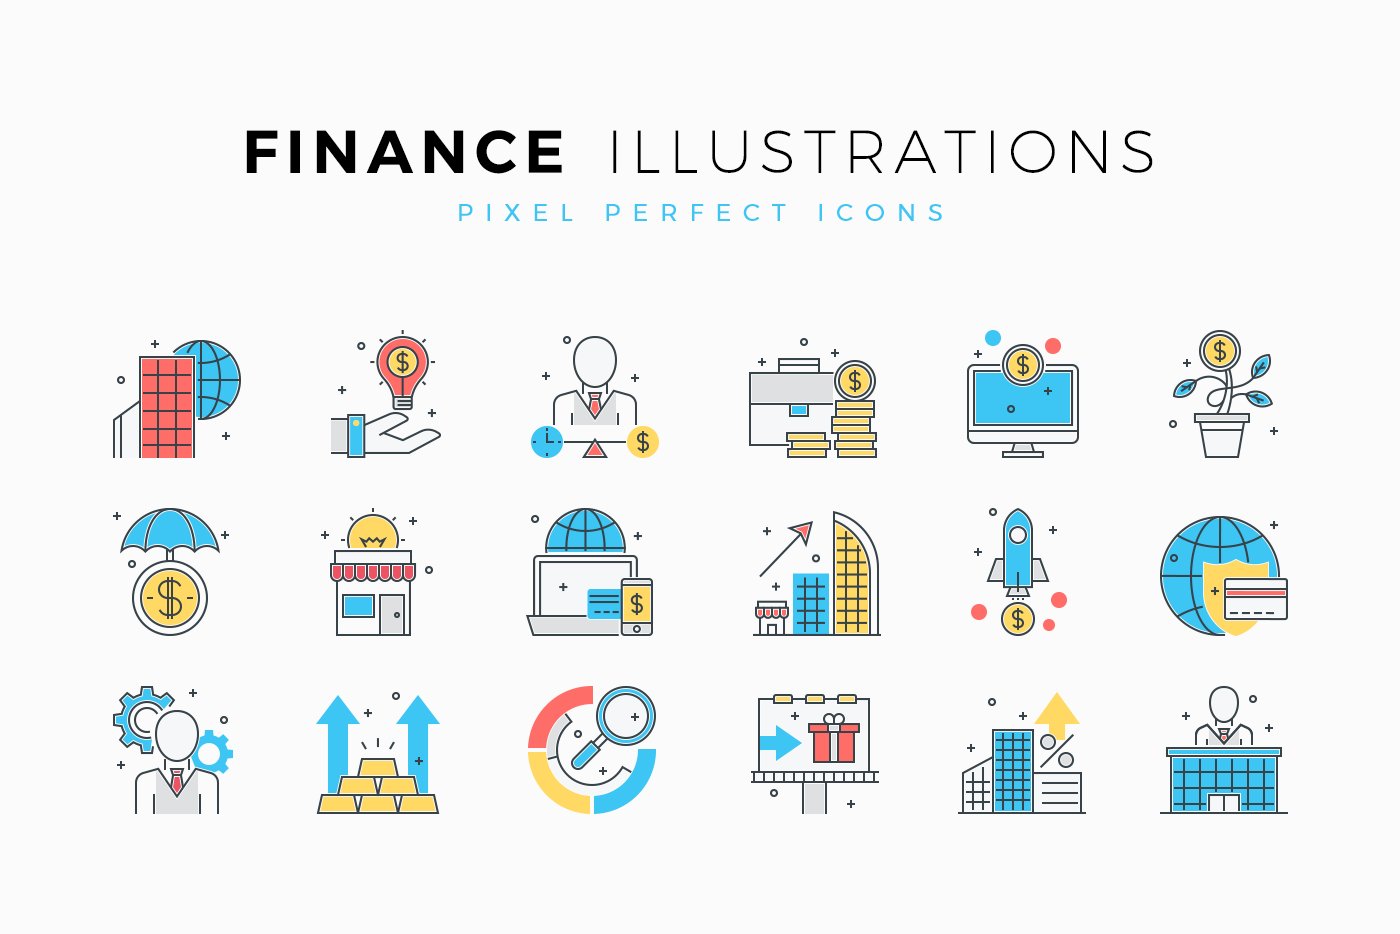 Finance Icons & Illustrations cover image.